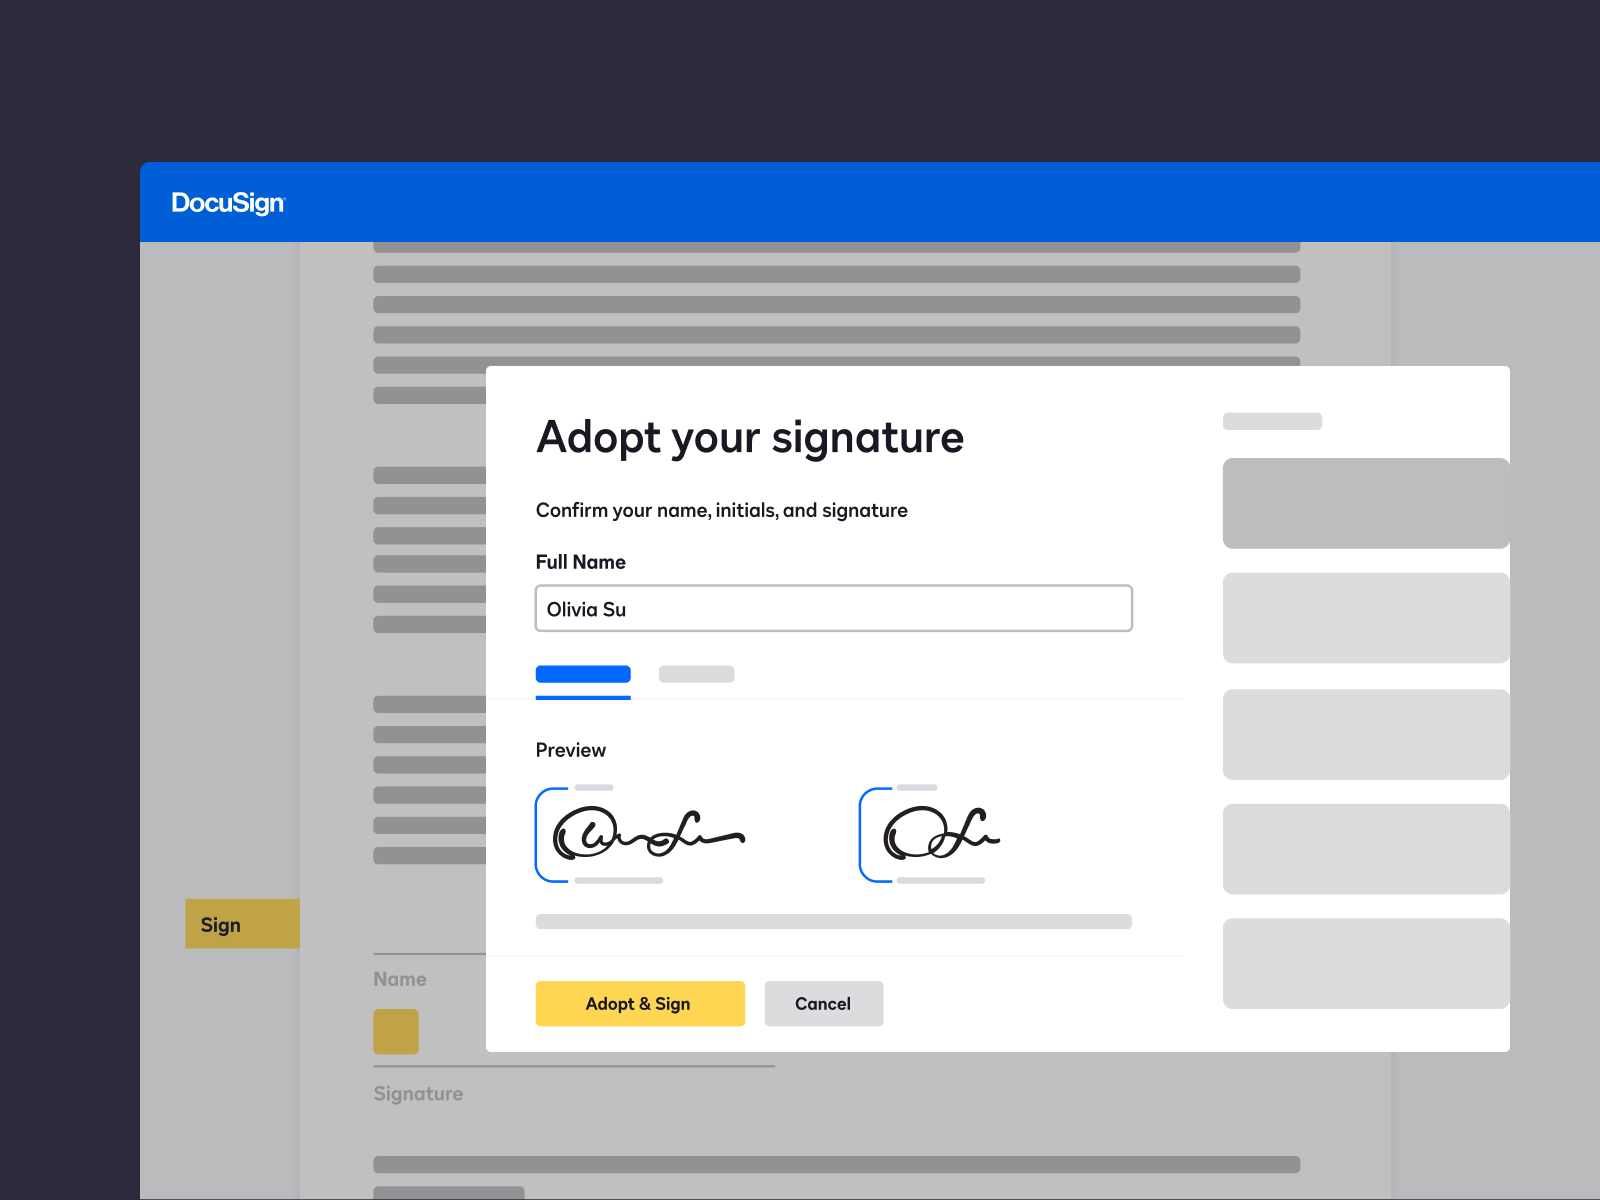 DocuSign, a SaaS company that offers eSignature software integral to doing business online